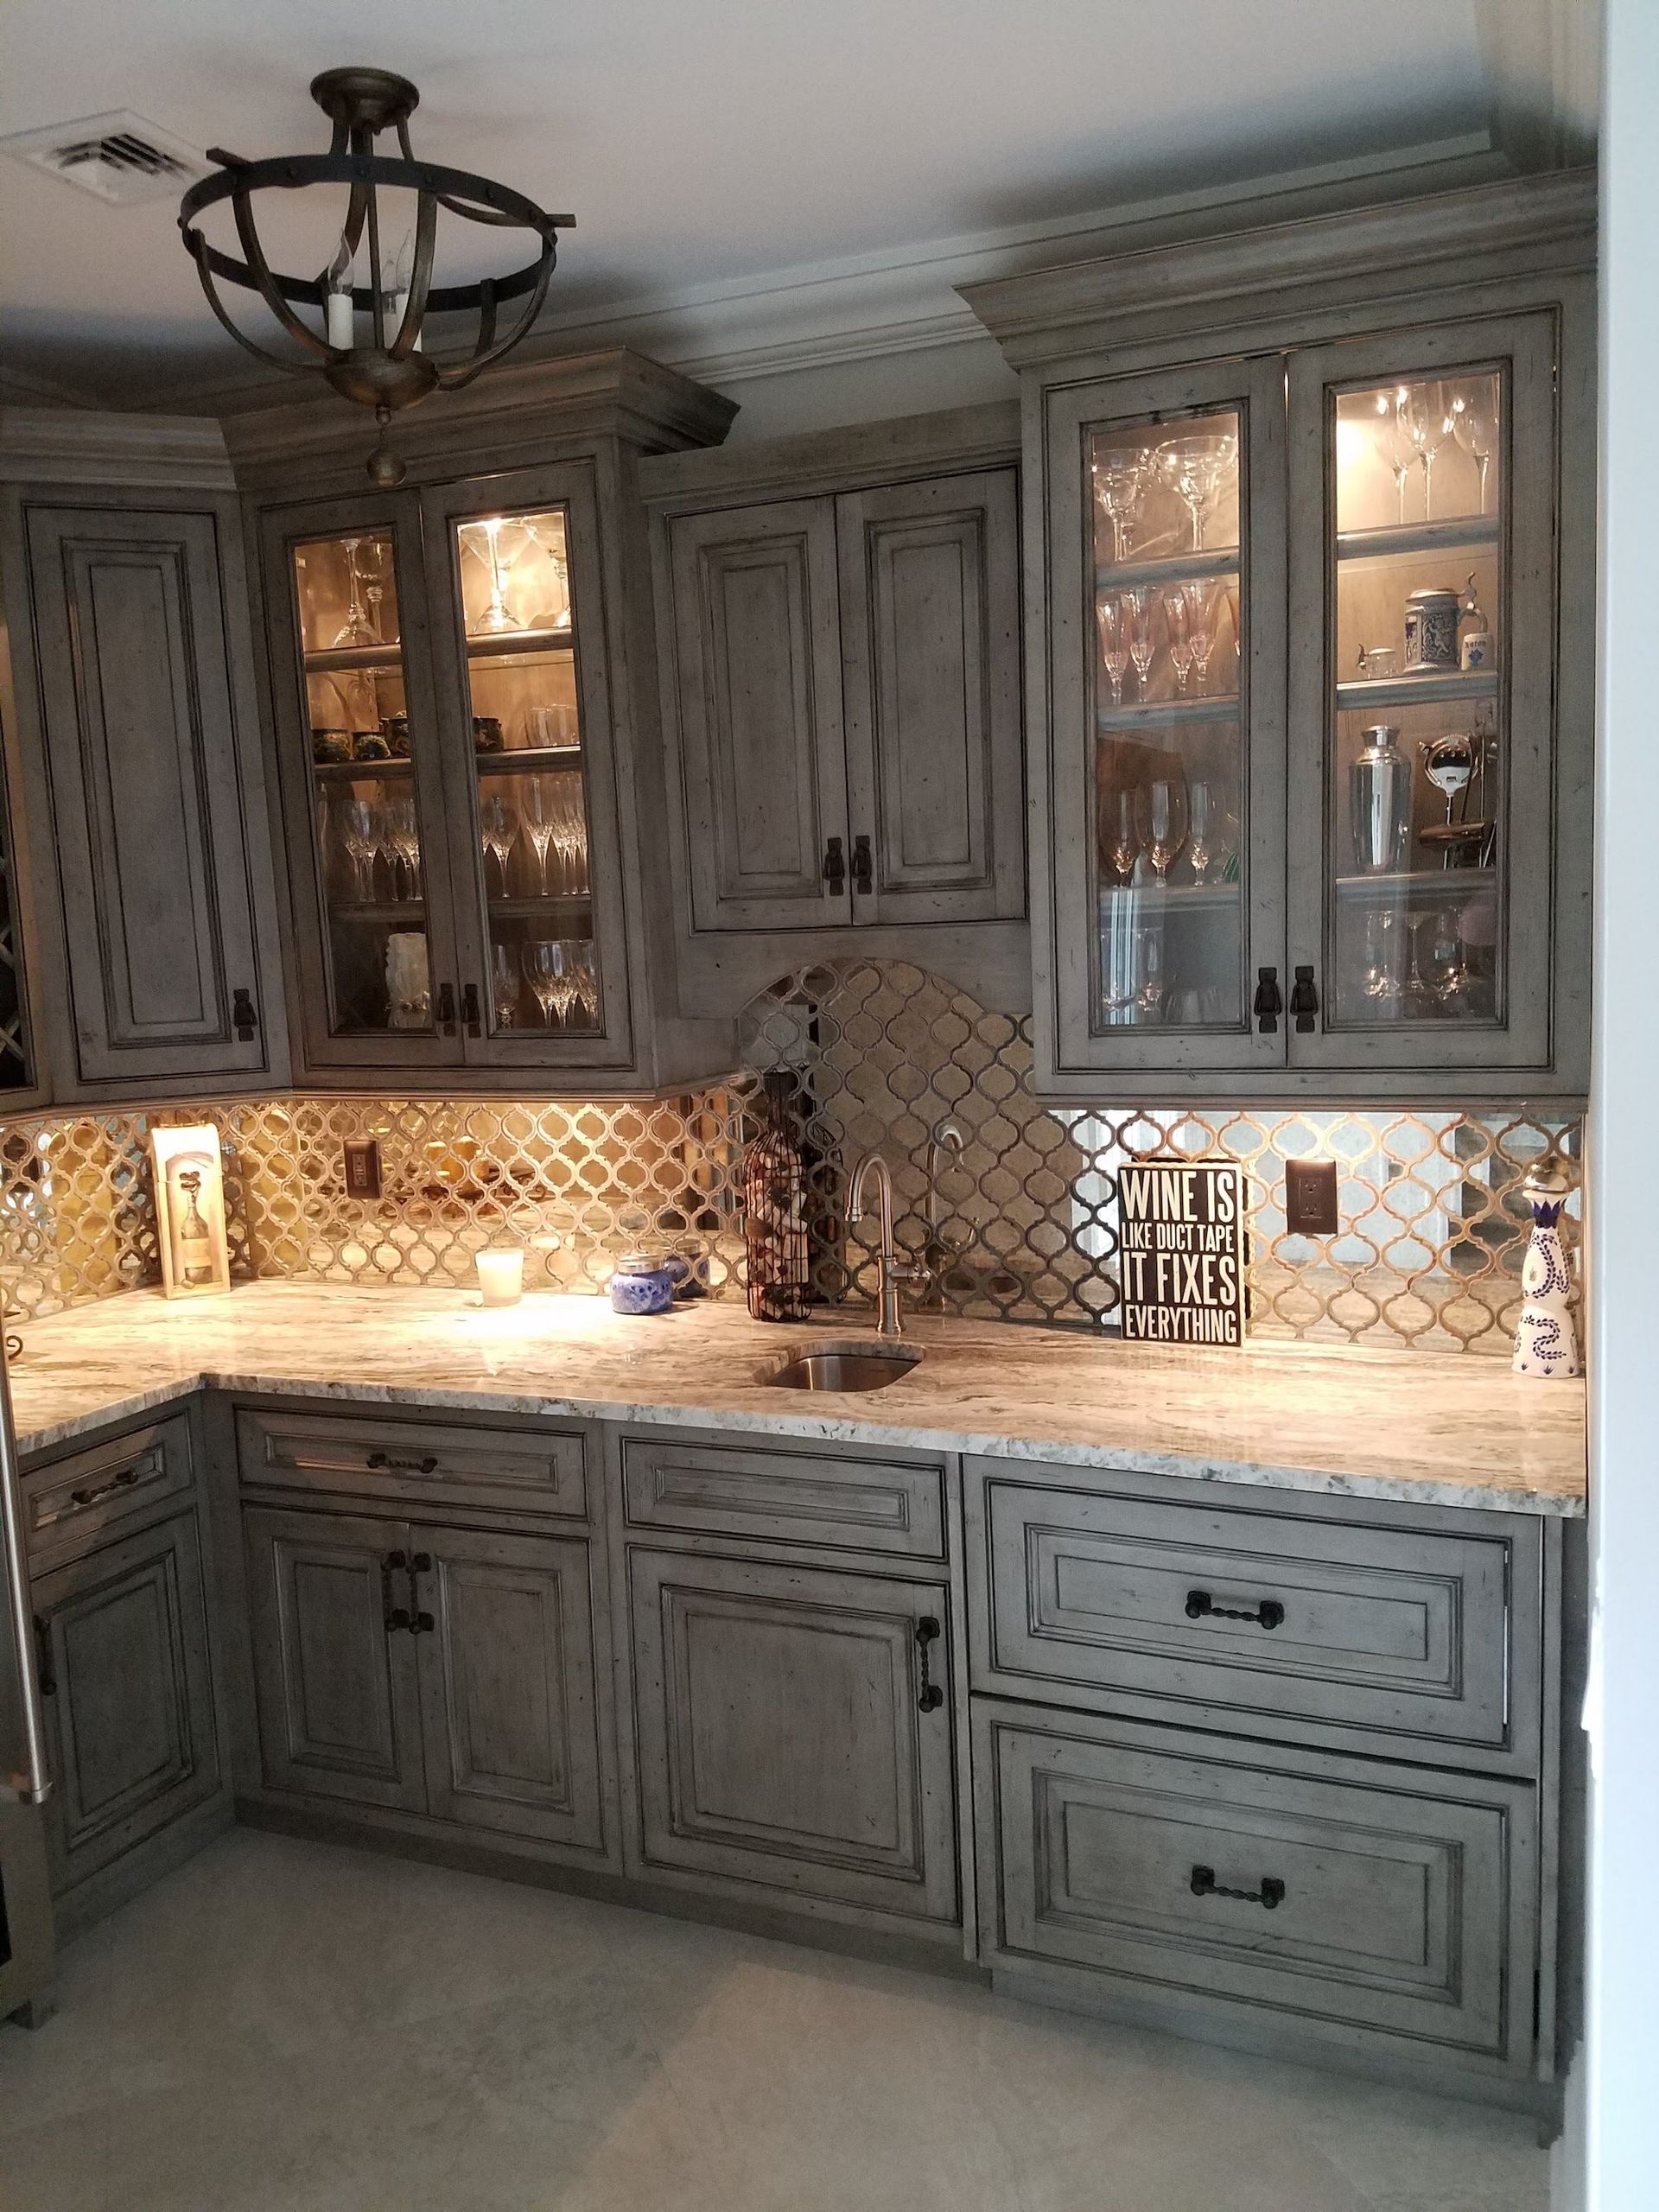 kitchen remodeling contractors in st. james. ny